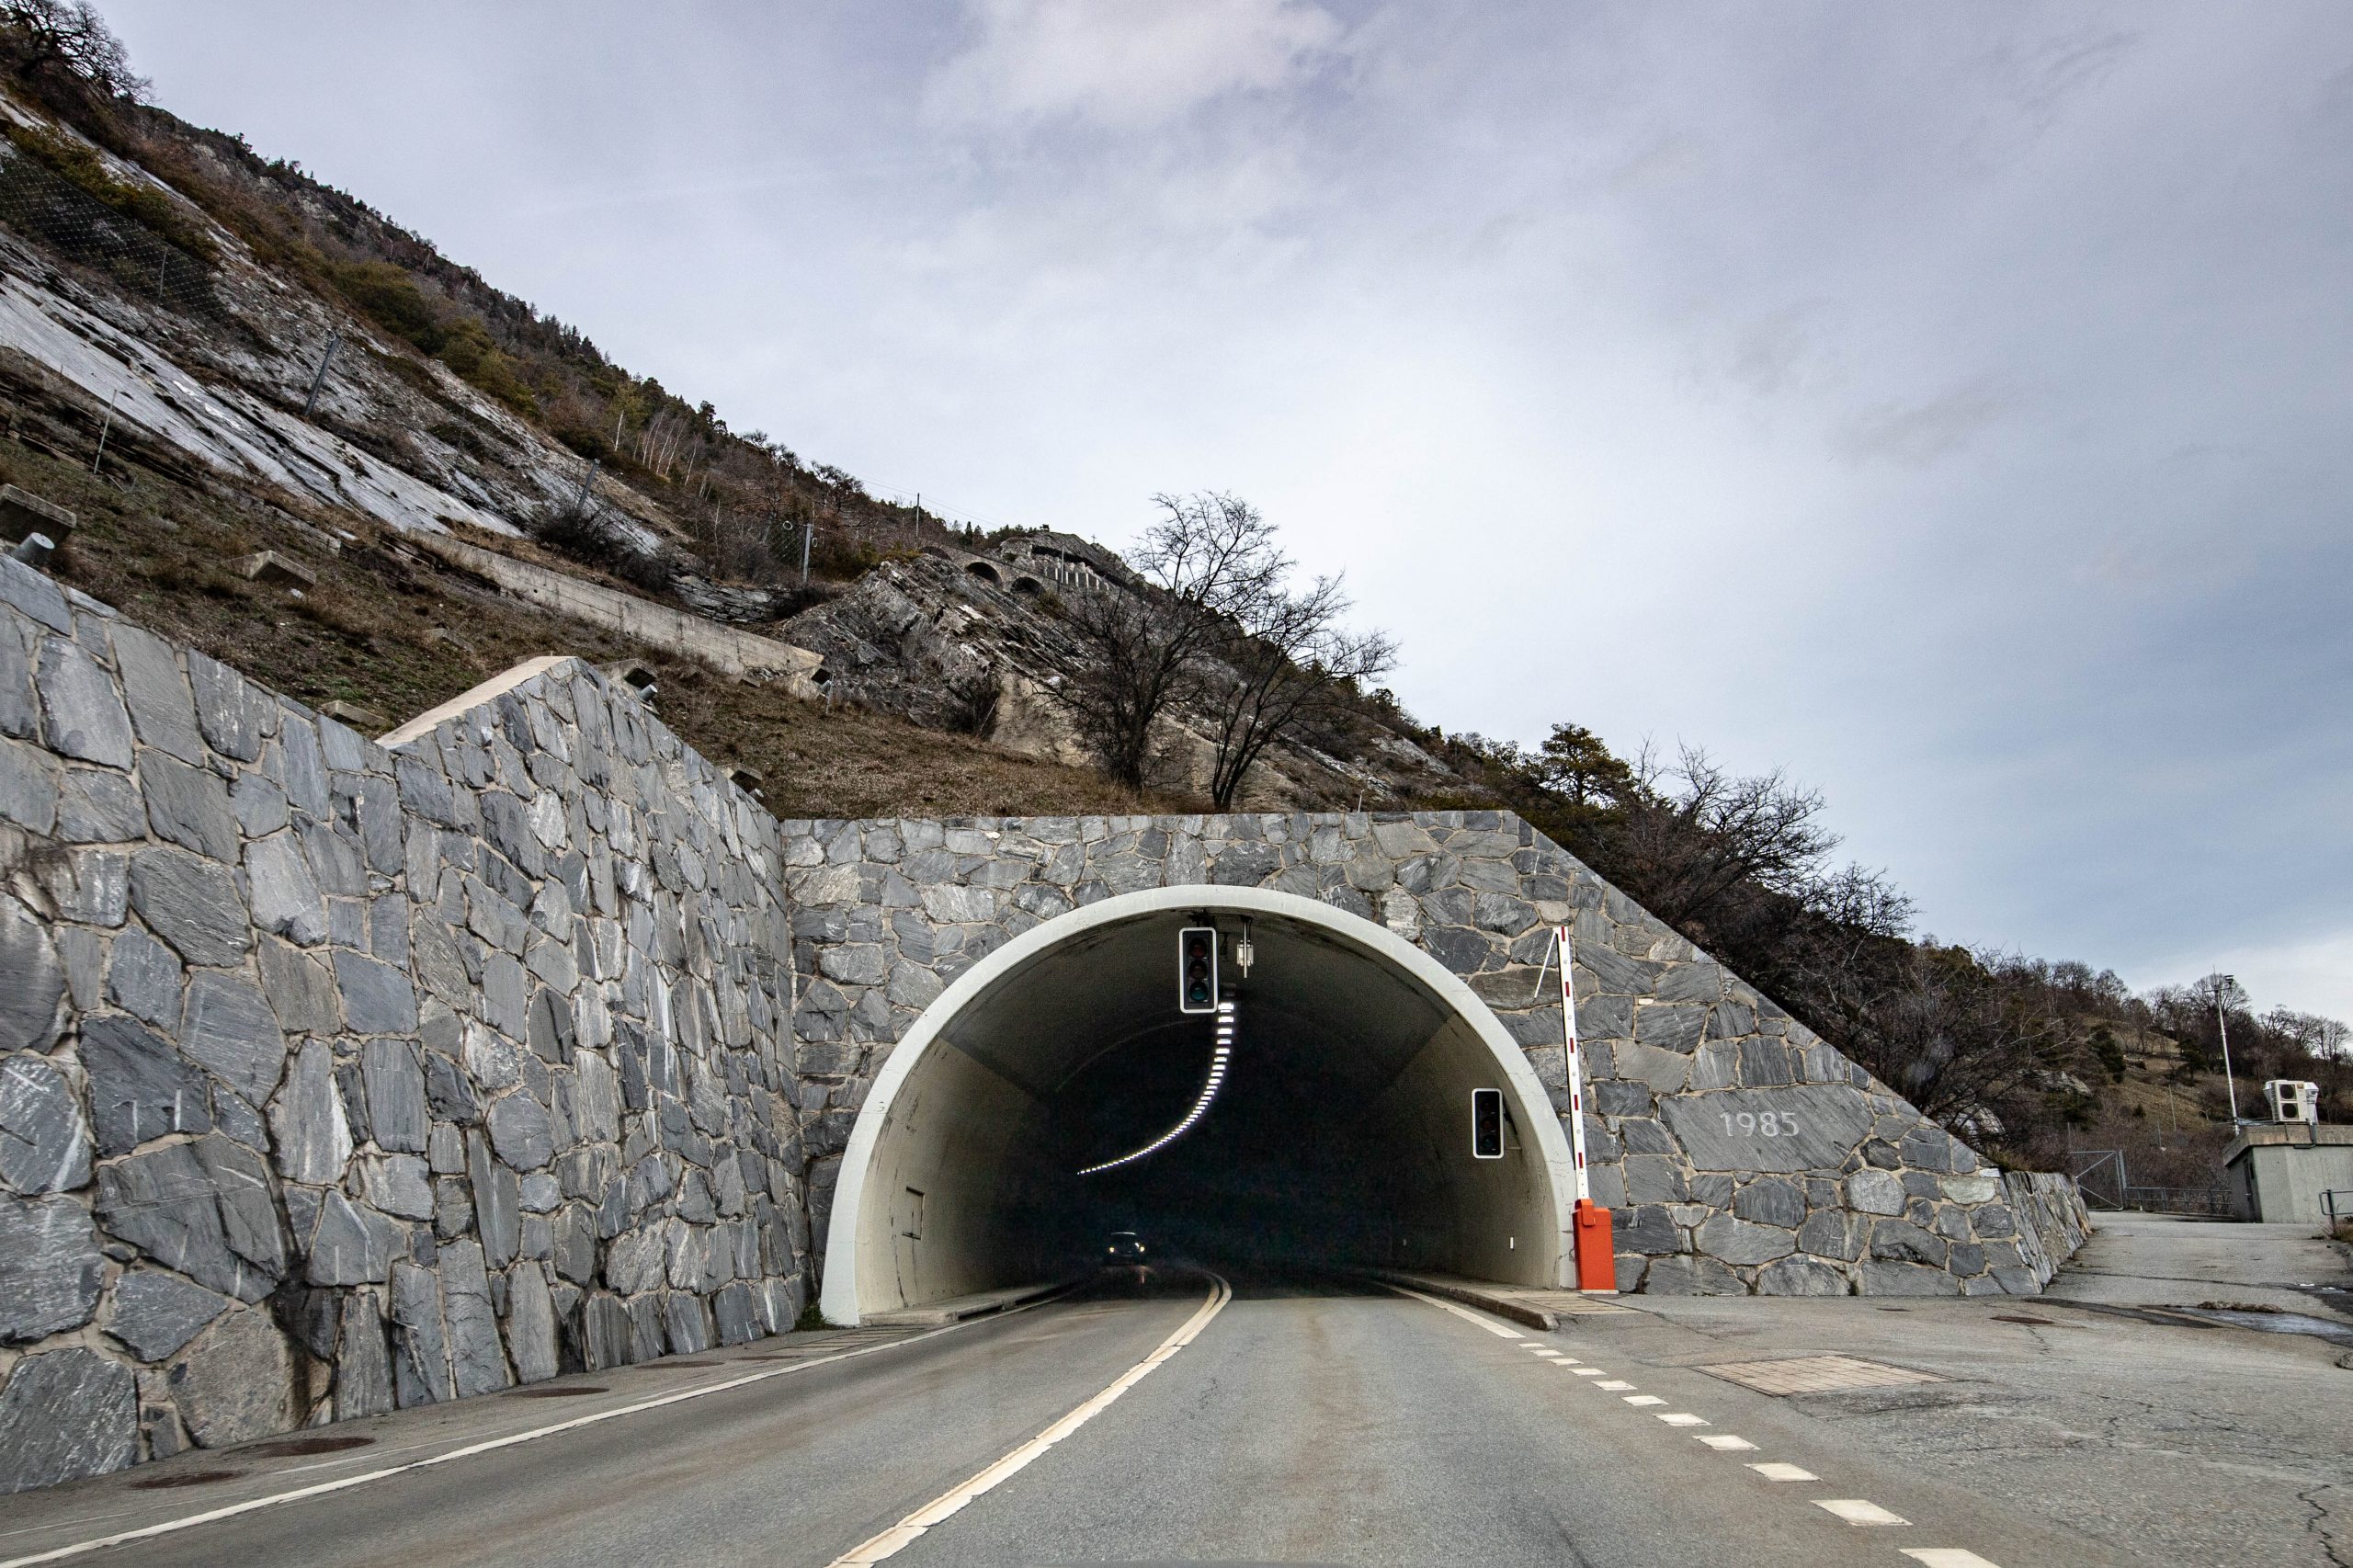 https://blog.astra.admin.ch/wp-content/uploads/2021/12/A6-Mittaltunnel-scaled.jpg